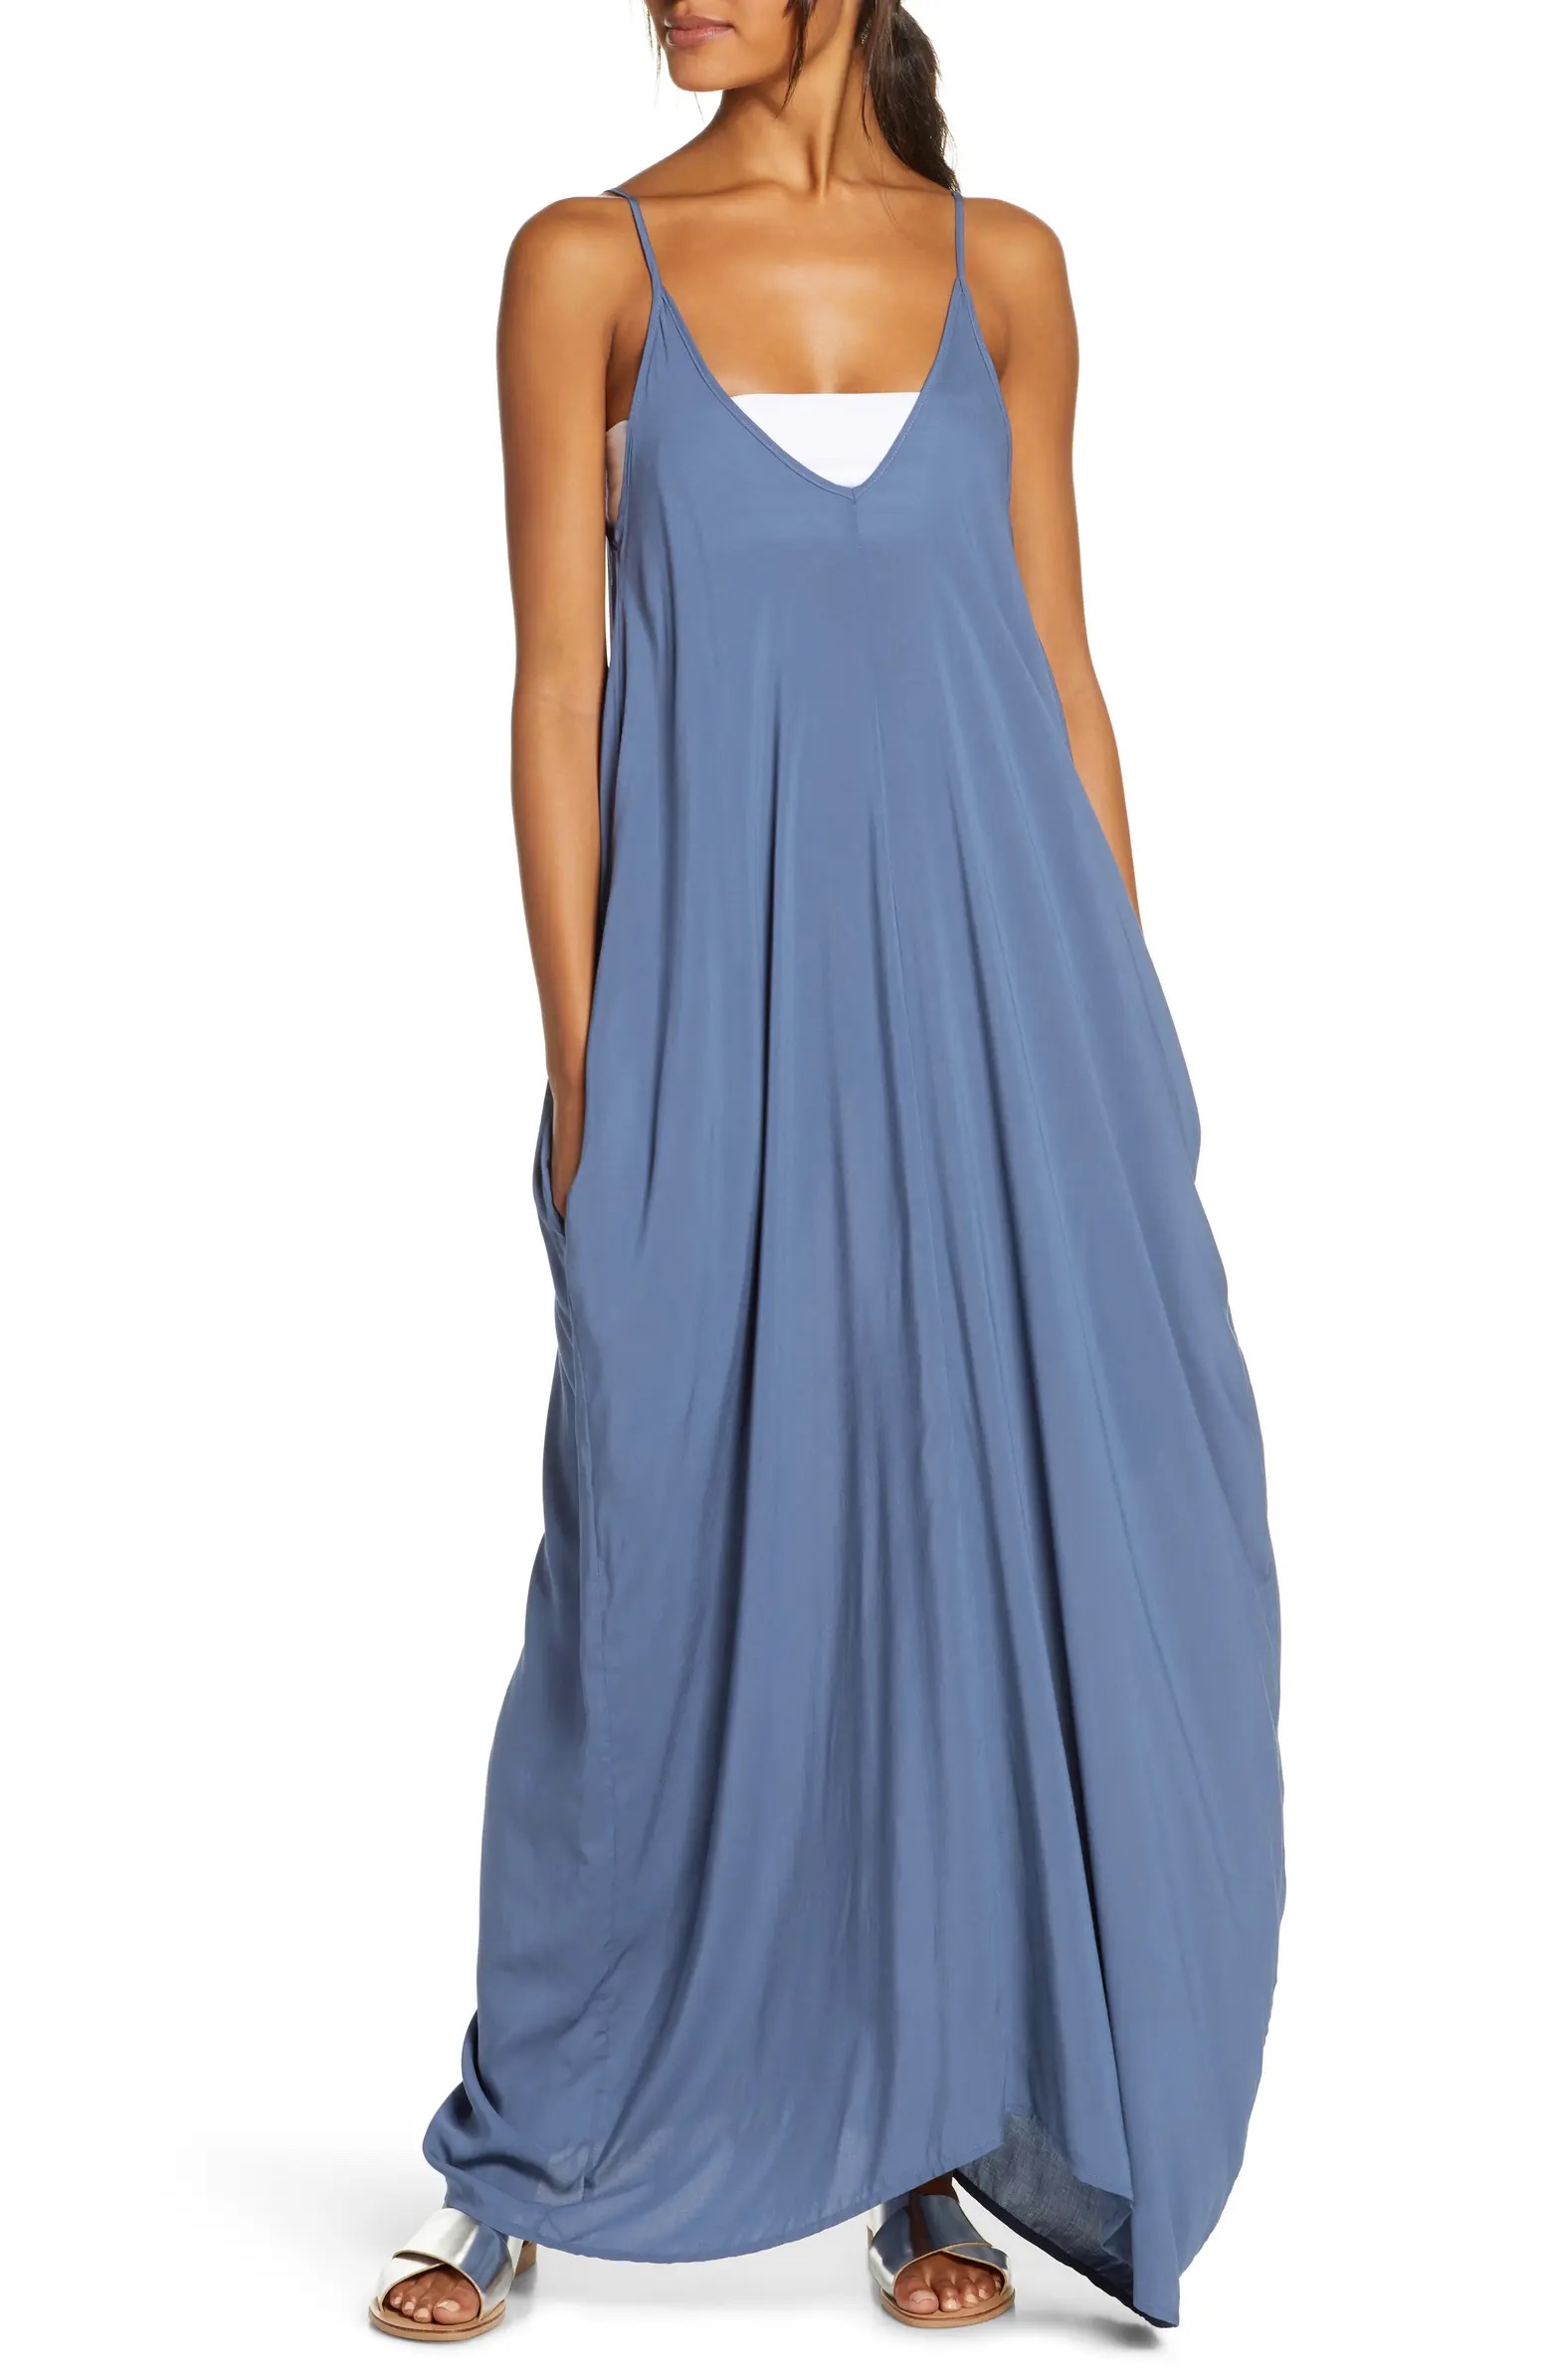 Stylish beach coverups for women: This billowy maxi dress from Elan goes from pool to restaurant seamlessly.